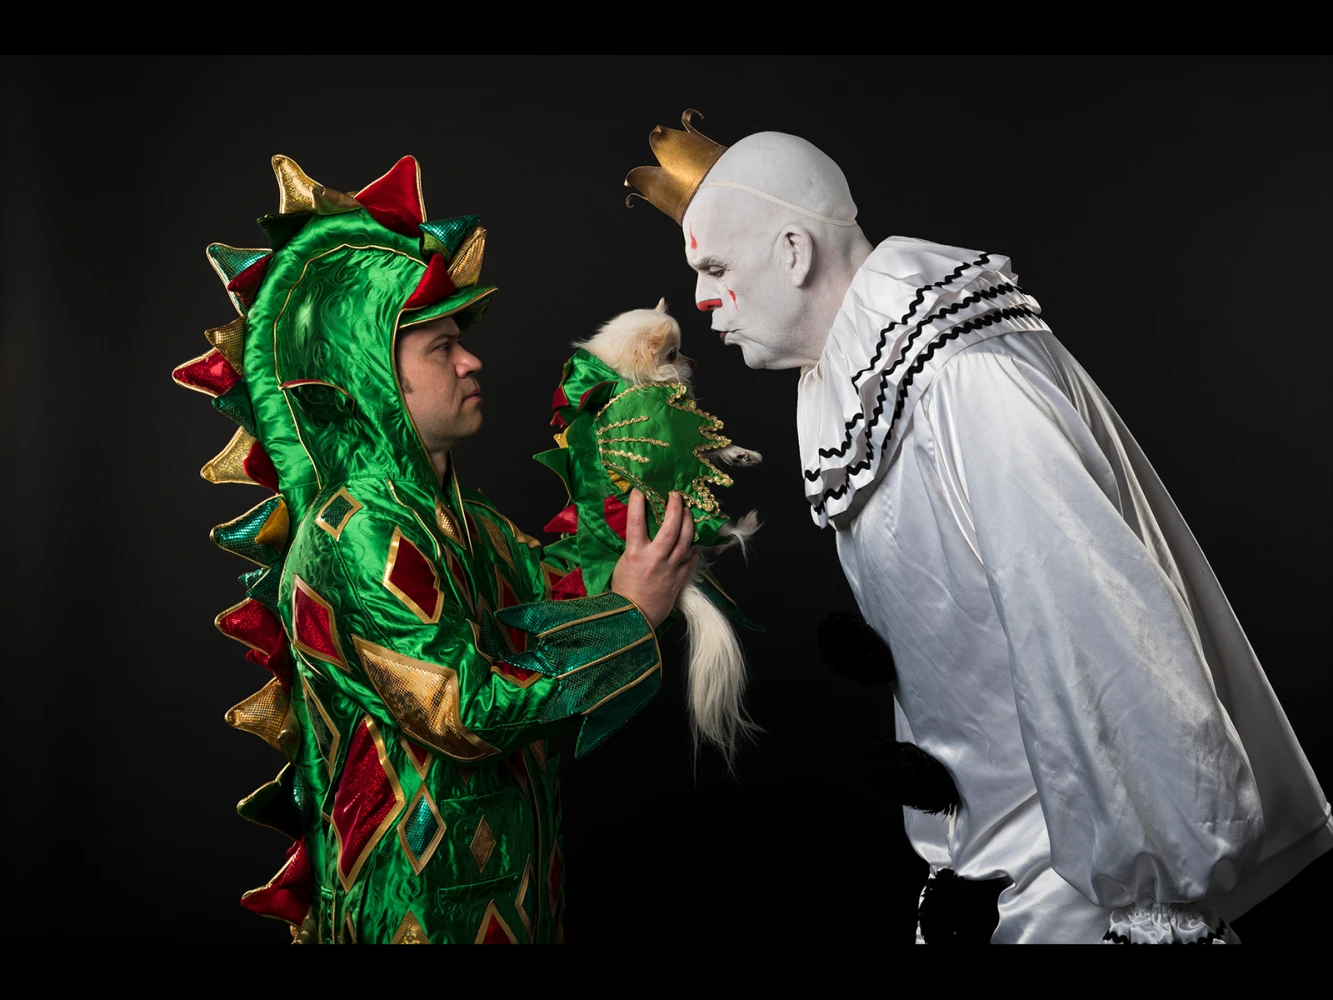 Piff the Magic Dragon and Puddles Pity Party: The Misery Loves Company Tour: What to expect - 1